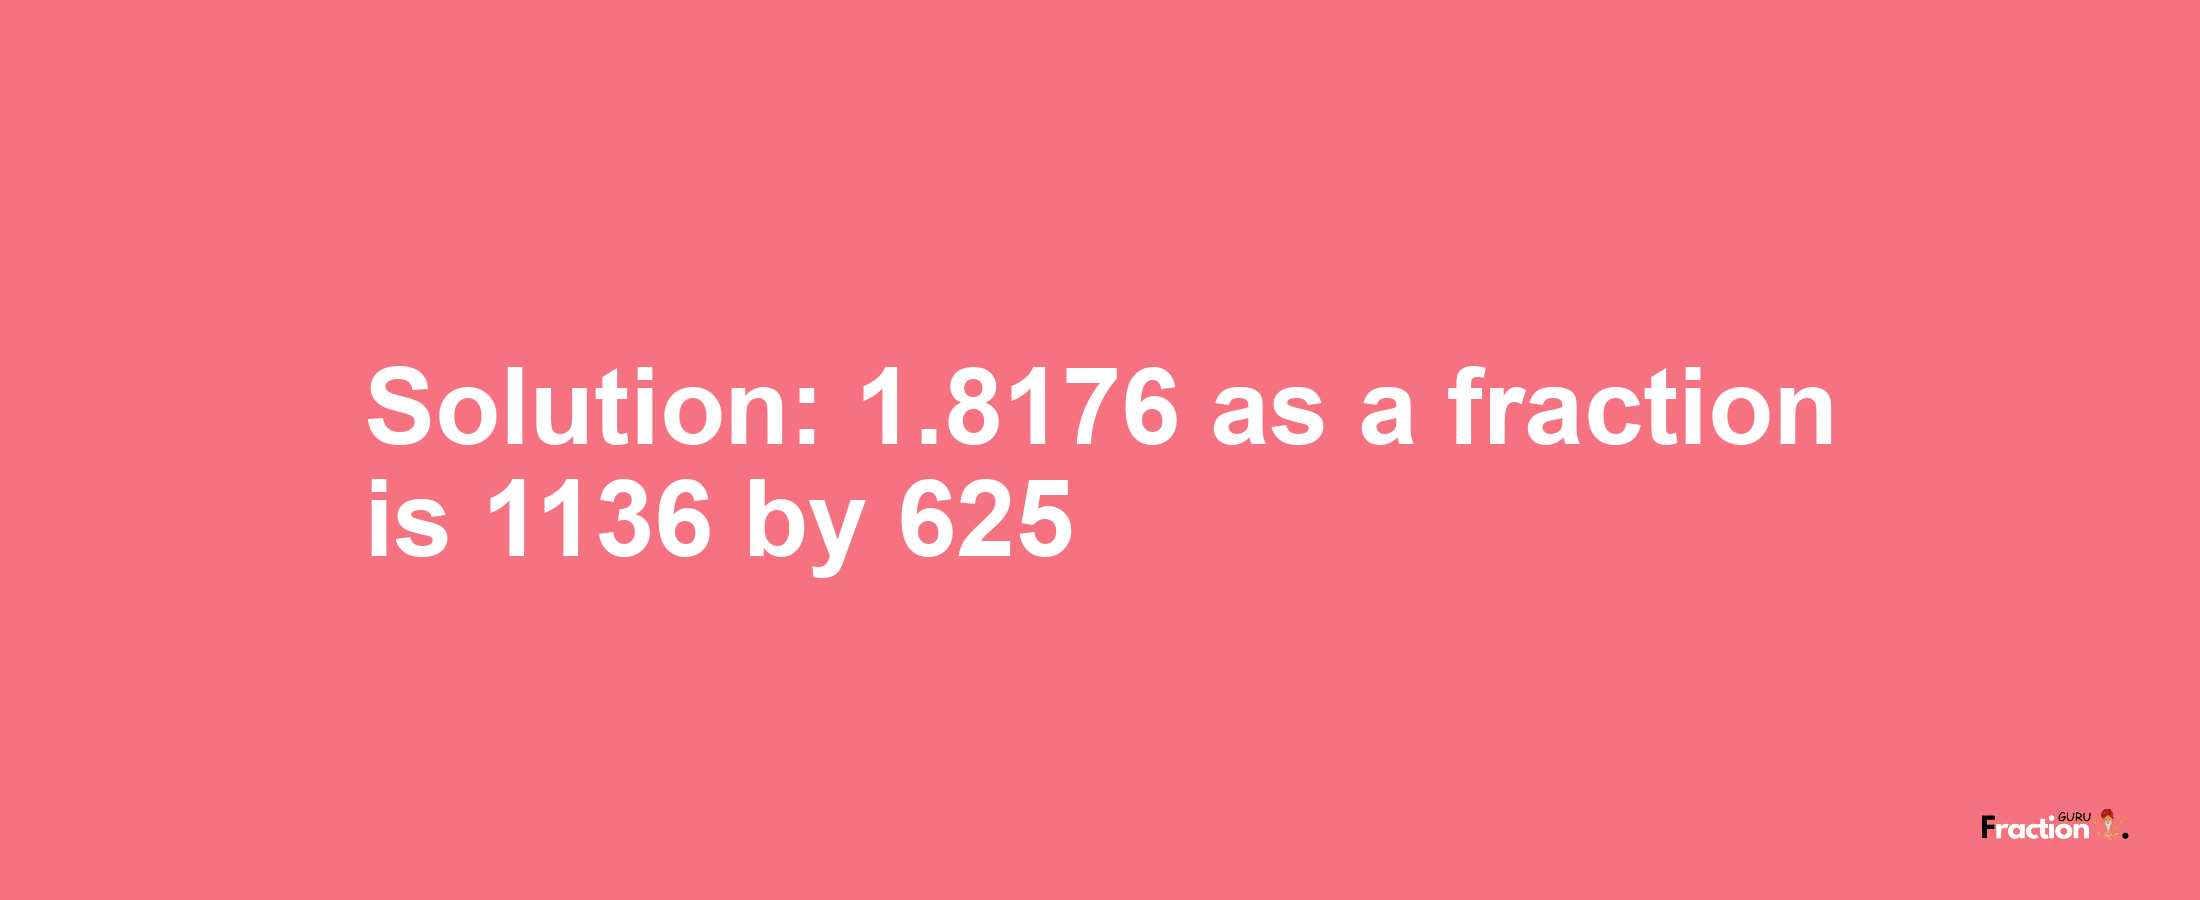 Solution:1.8176 as a fraction is 1136/625